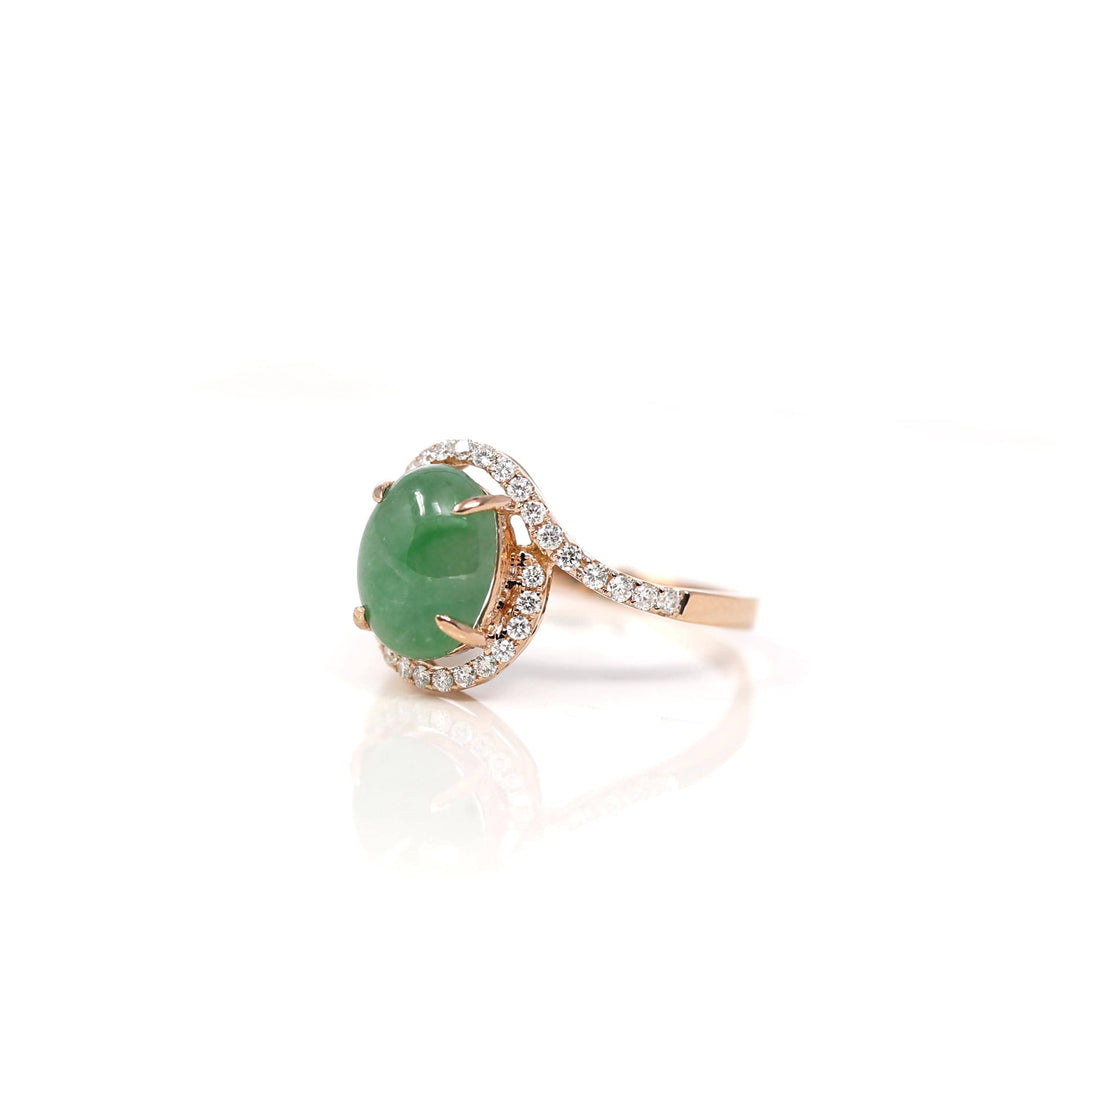 Baikalla Jewelry Jadeite Engagement Ring 18k Rose Gold Natural Imperial Green Oval Jadeite Jade Engagement Ring With Diamonds